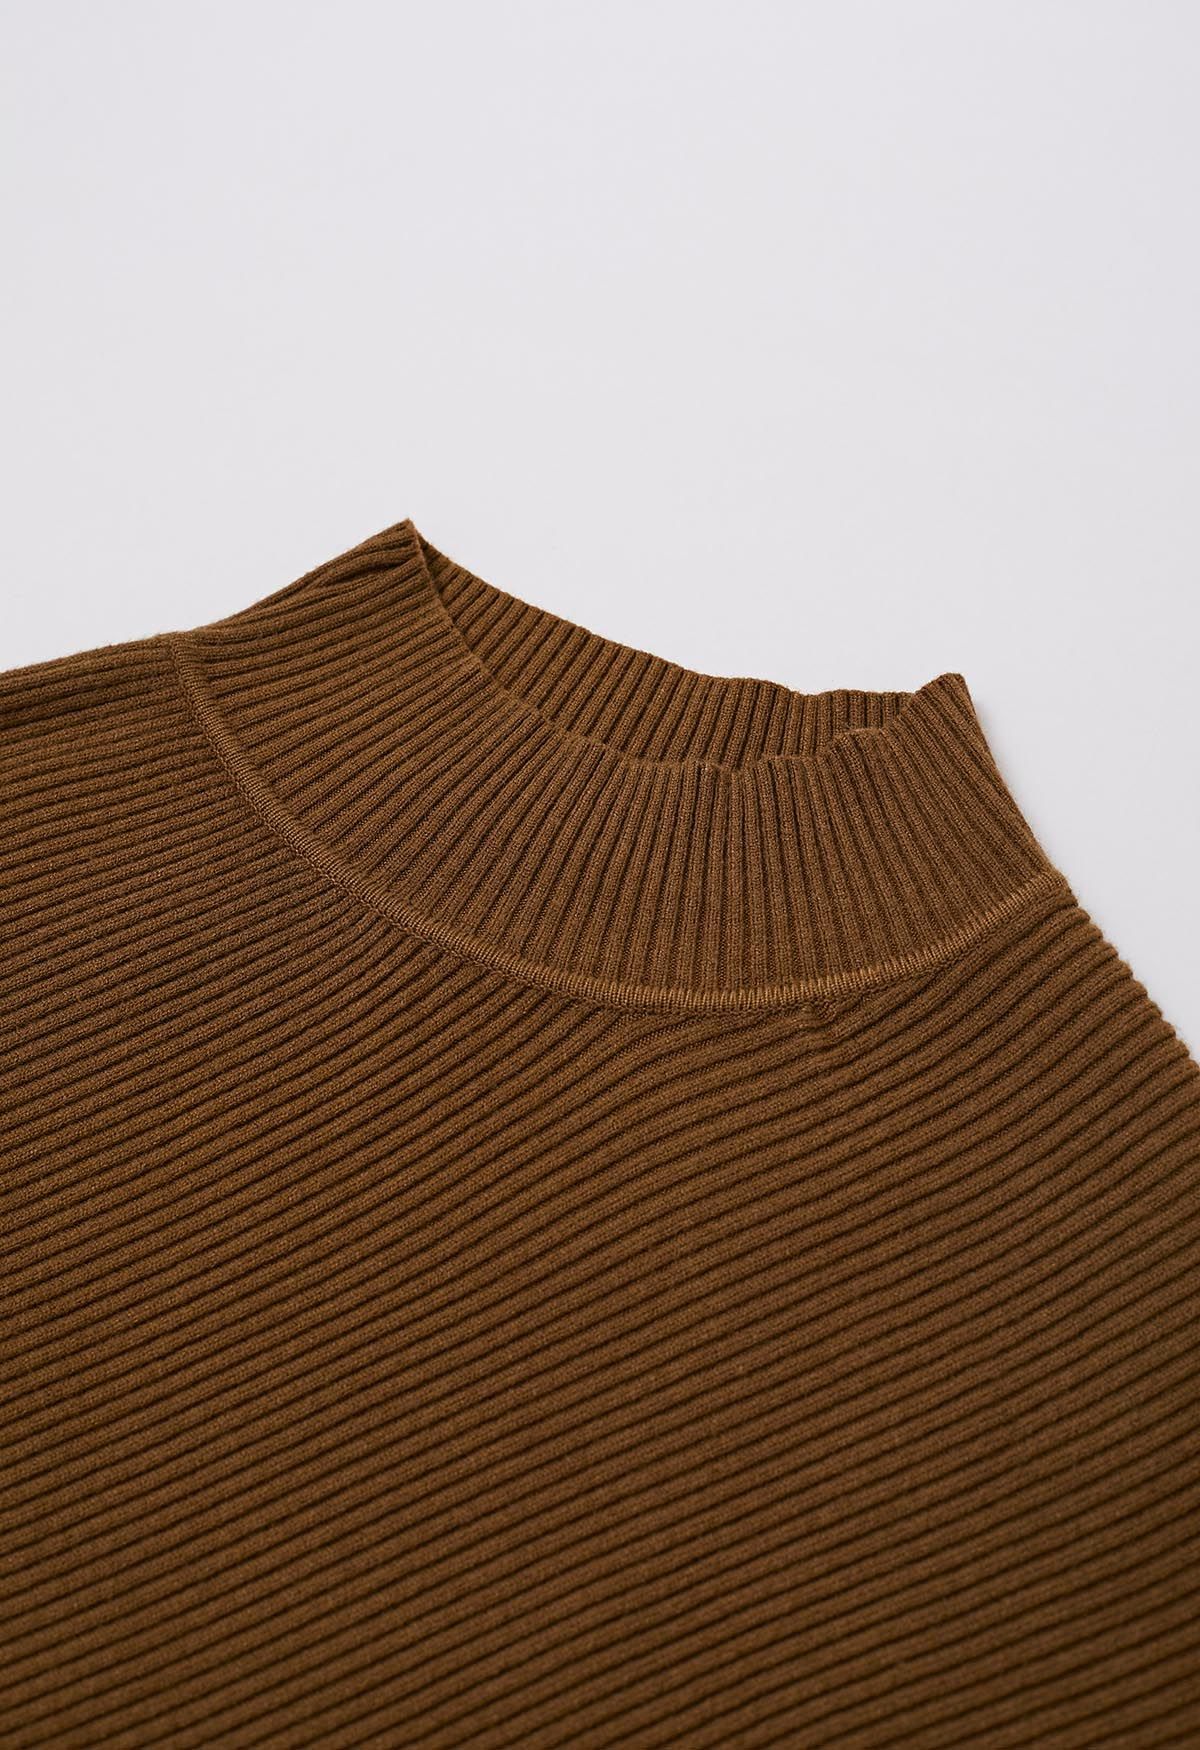 Asymmetric Batwing Sleeve Ribbed Knit Poncho in Caramel